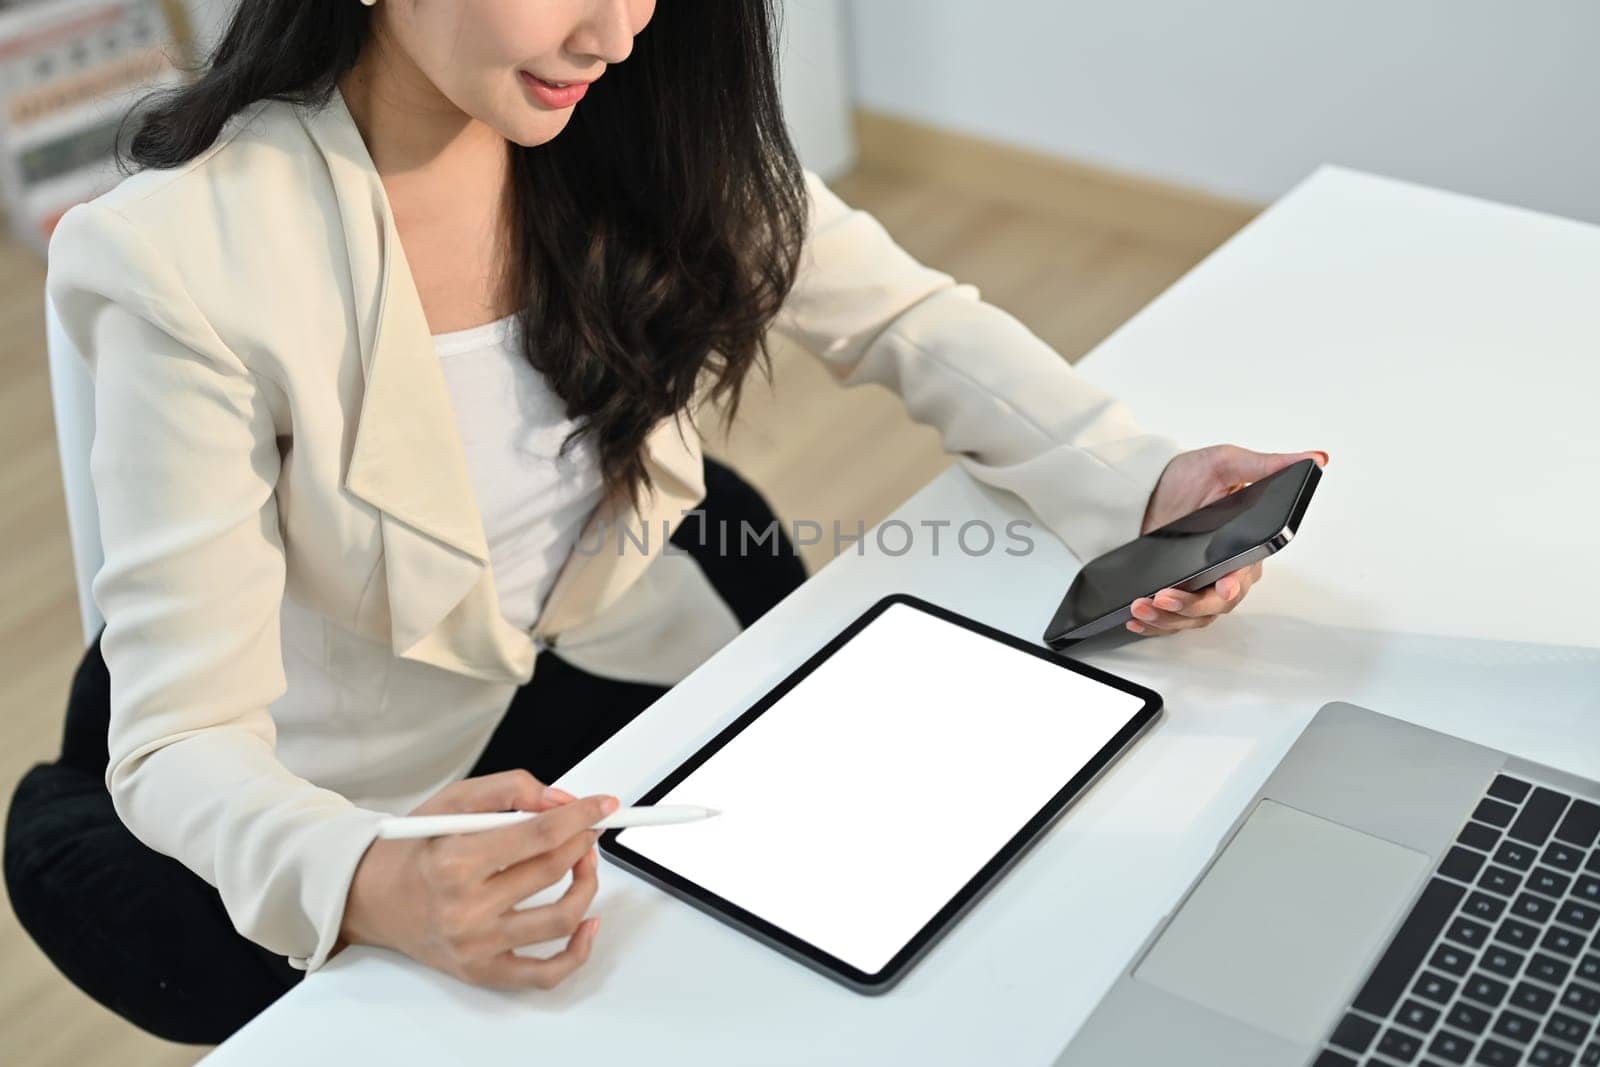 Cropped shot view of young businesswoman hand holding mobile phone and using digital tablet at office desk.